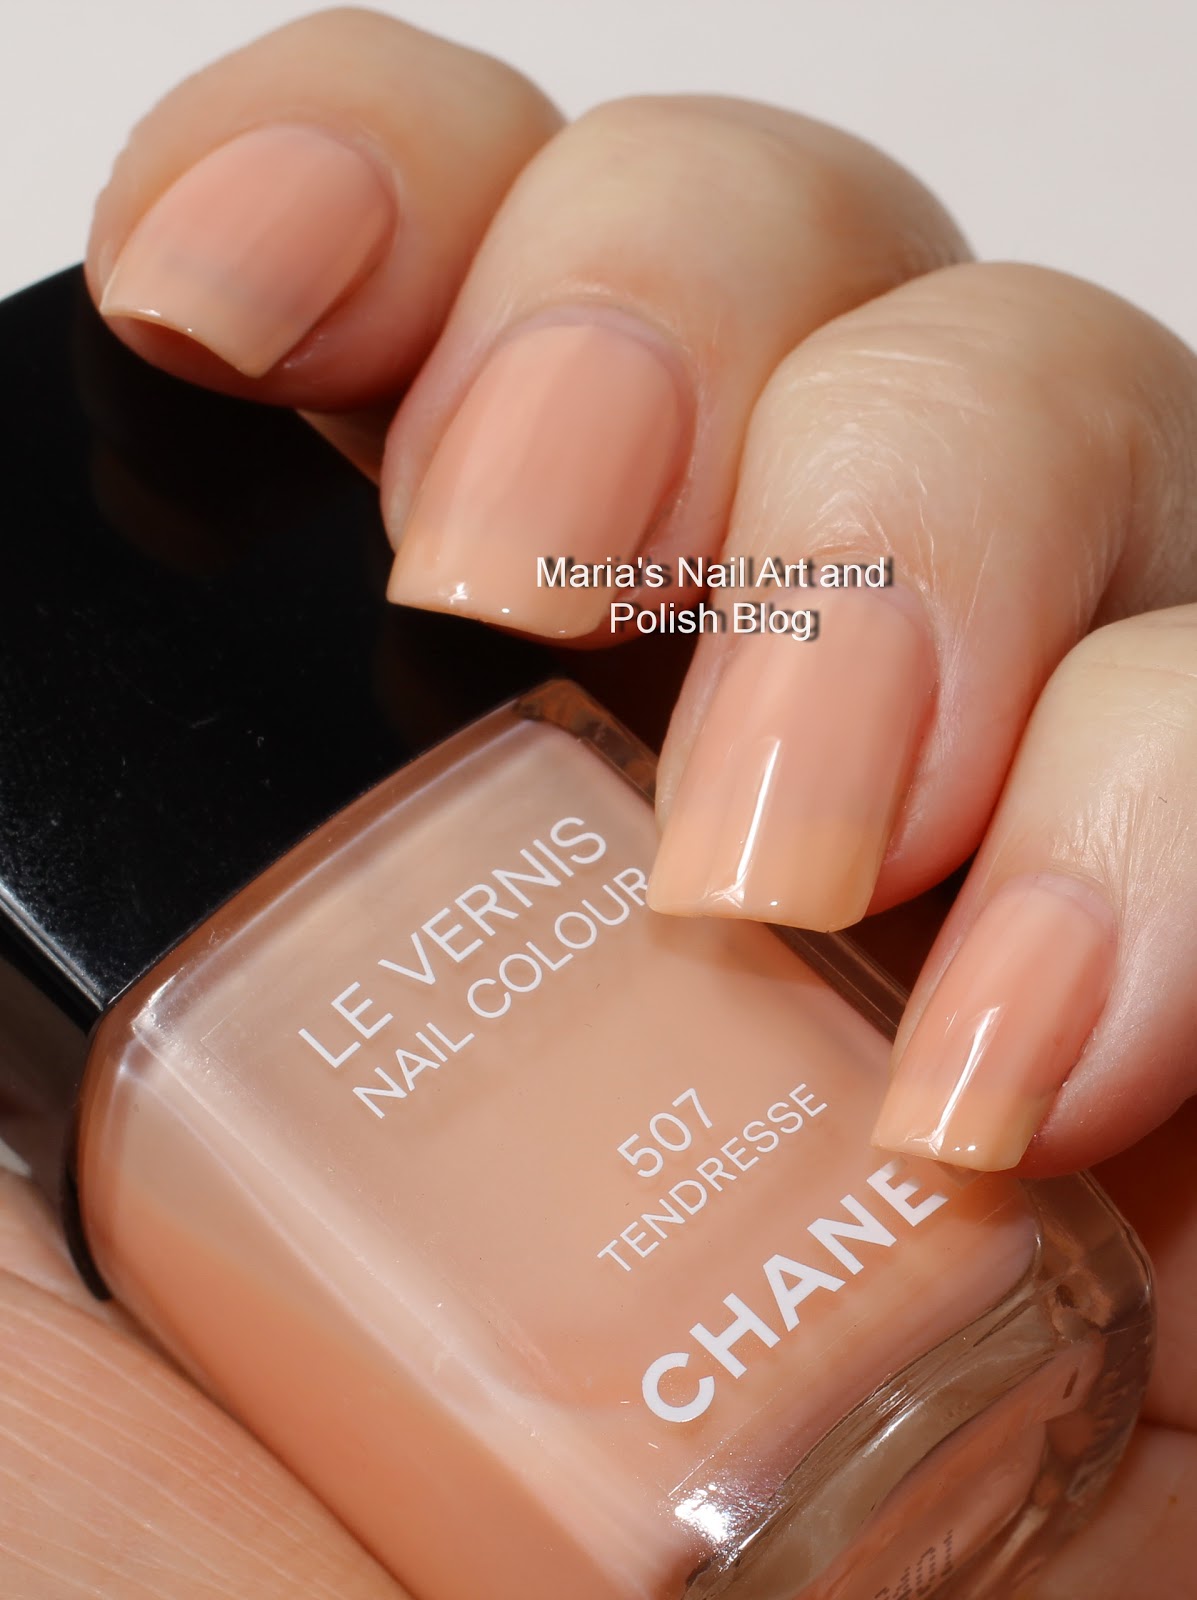 Marias Nail Art and Polish Blog: Chanel Tendresse, Les Impression de Chanel  collection swatches